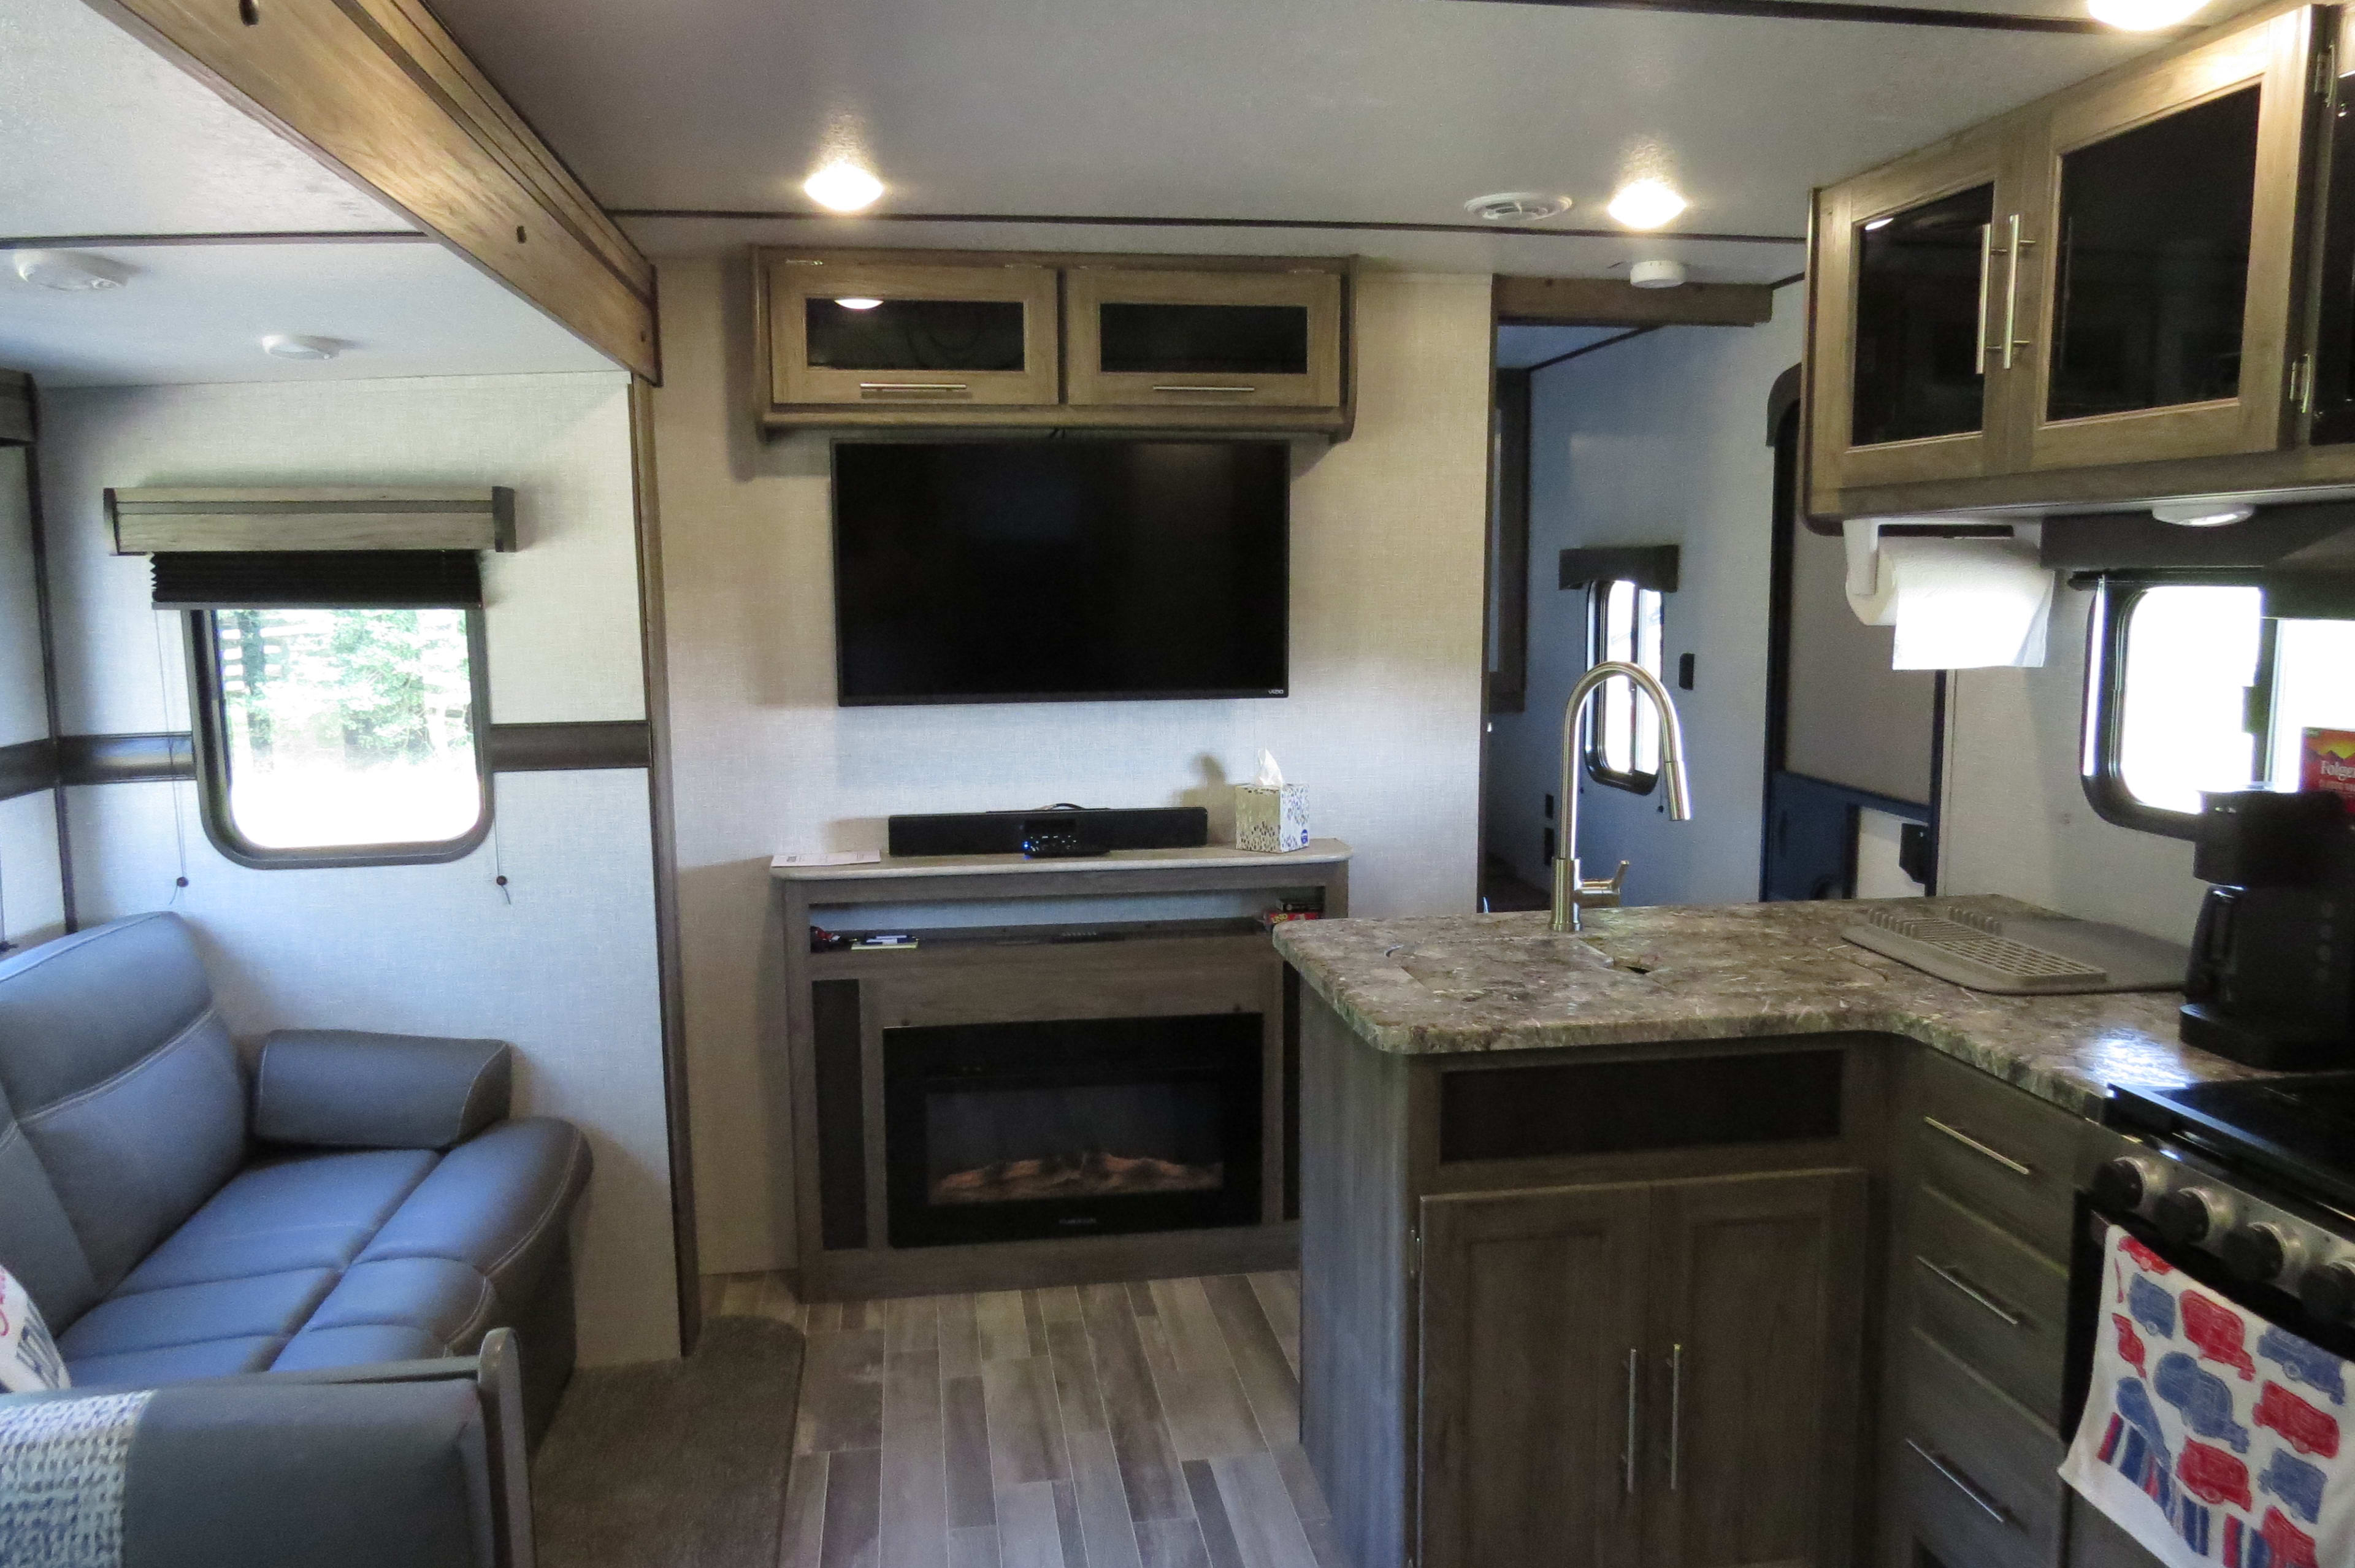 There is a tv and a radio that will play in and out of the trailer.  